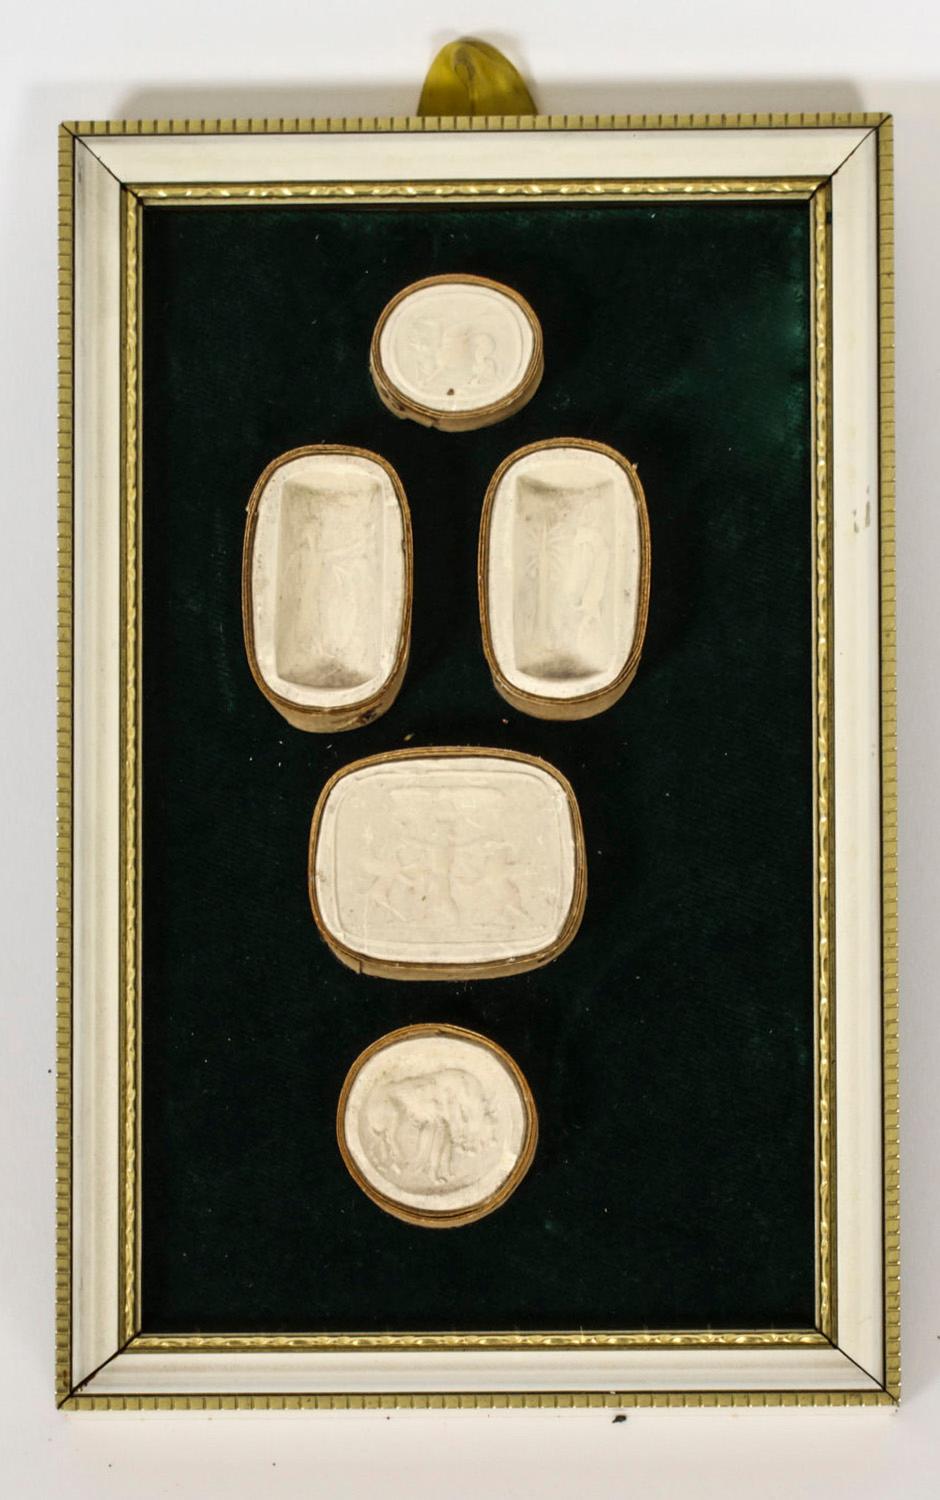 An elegant set of three framed intaglios, enclosing  eighteen plaster Grand Tour Giovanni Liberotti intaglios dating from the early 19th Century.

The large oval shaped plaster intaglios feature classical scenes.

The intaglios are beautifully